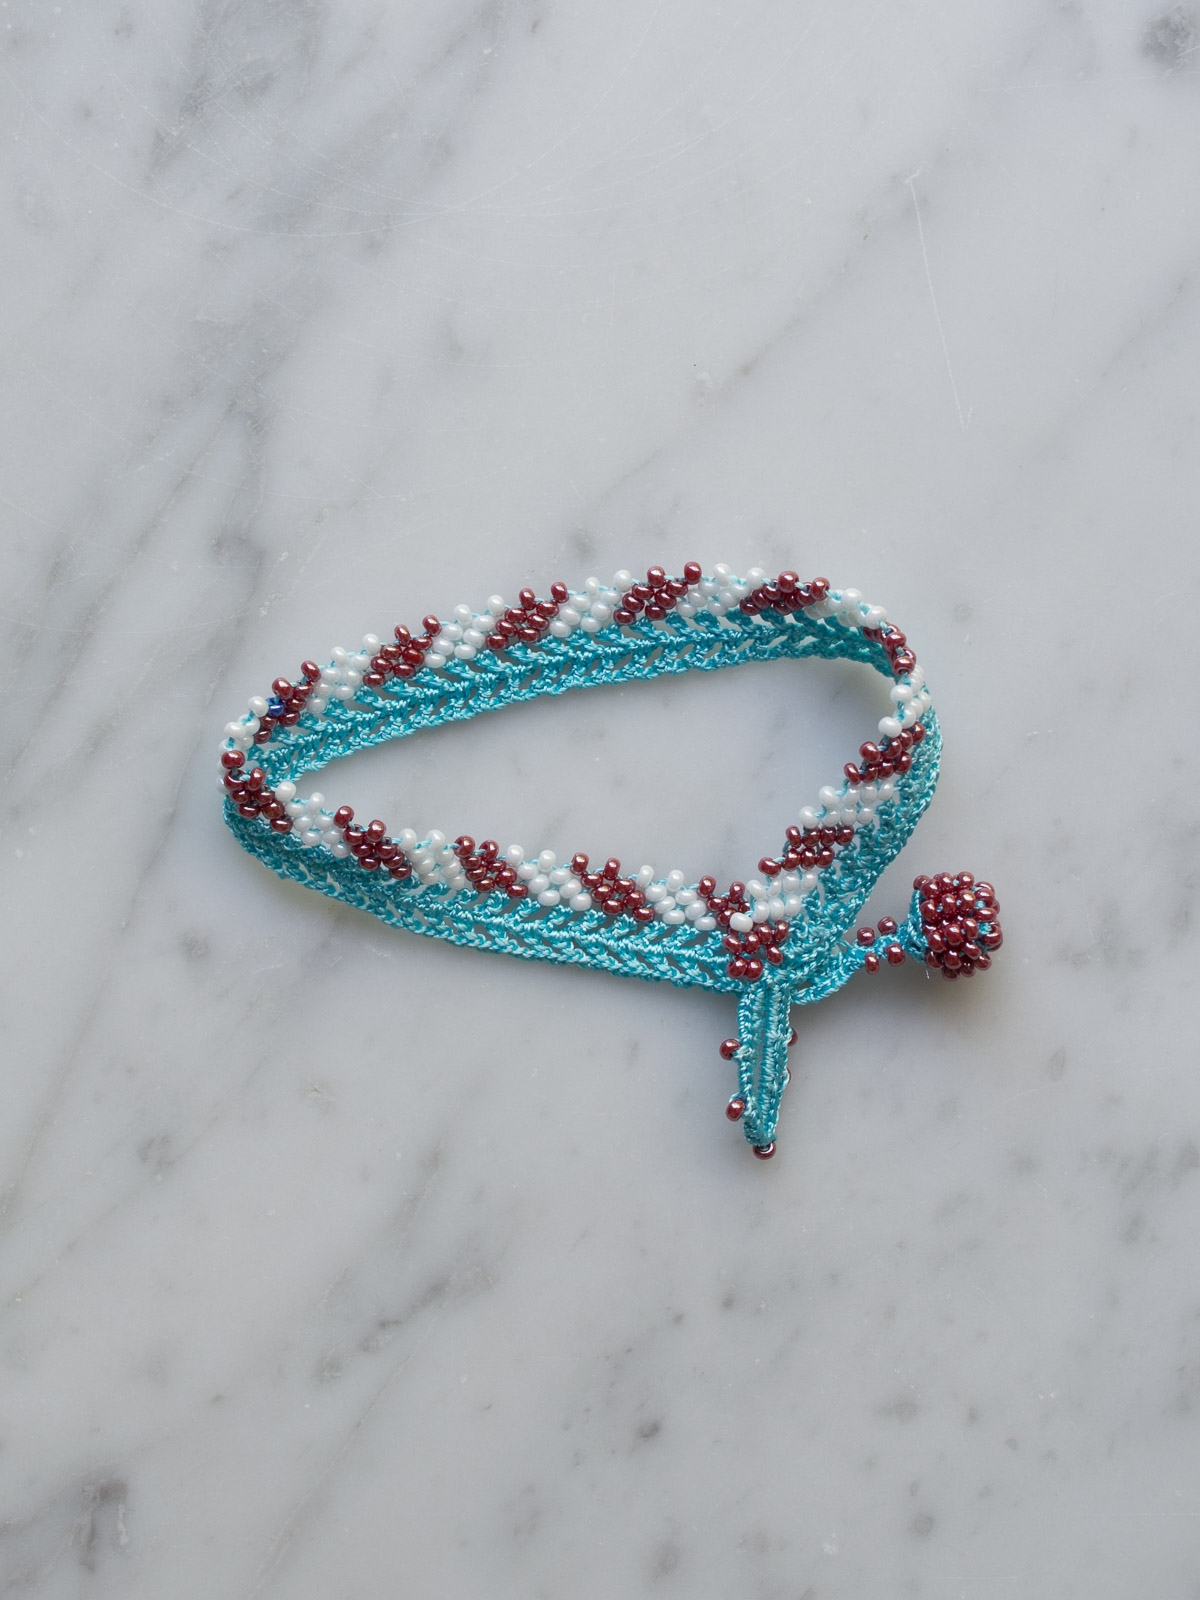 How to Make a Double Strand Stretch Bracelet - Living a Real Life